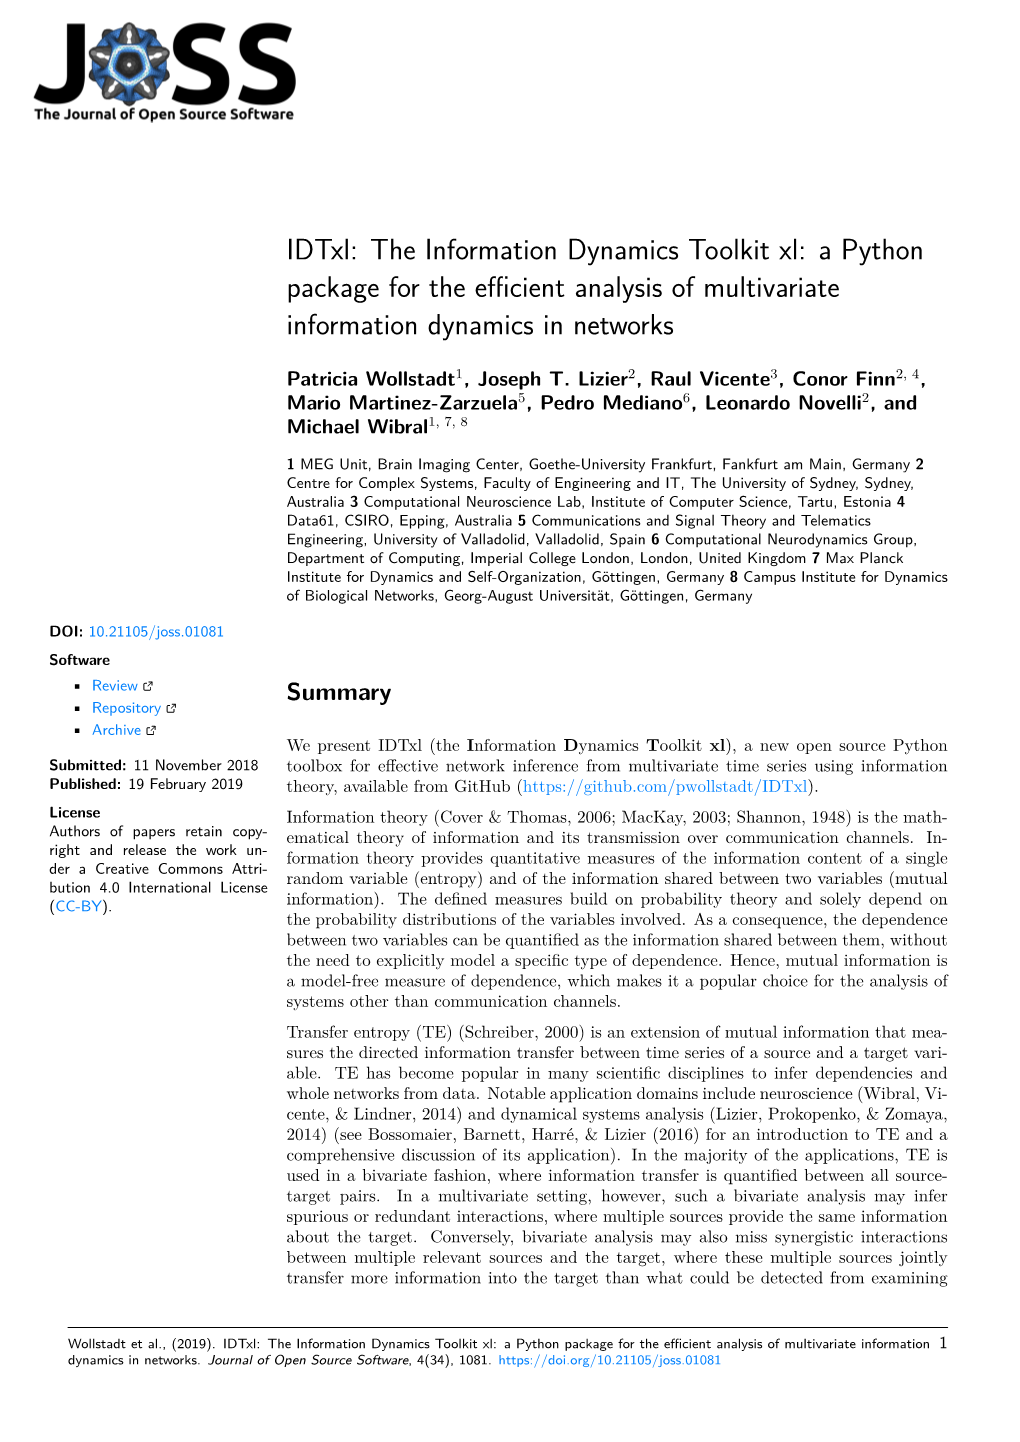 Idtxl: the Information Dynamics Toolkit Xl: a Python Package for the Efficient Analysis of Multivariate Information Dynamics in Networks